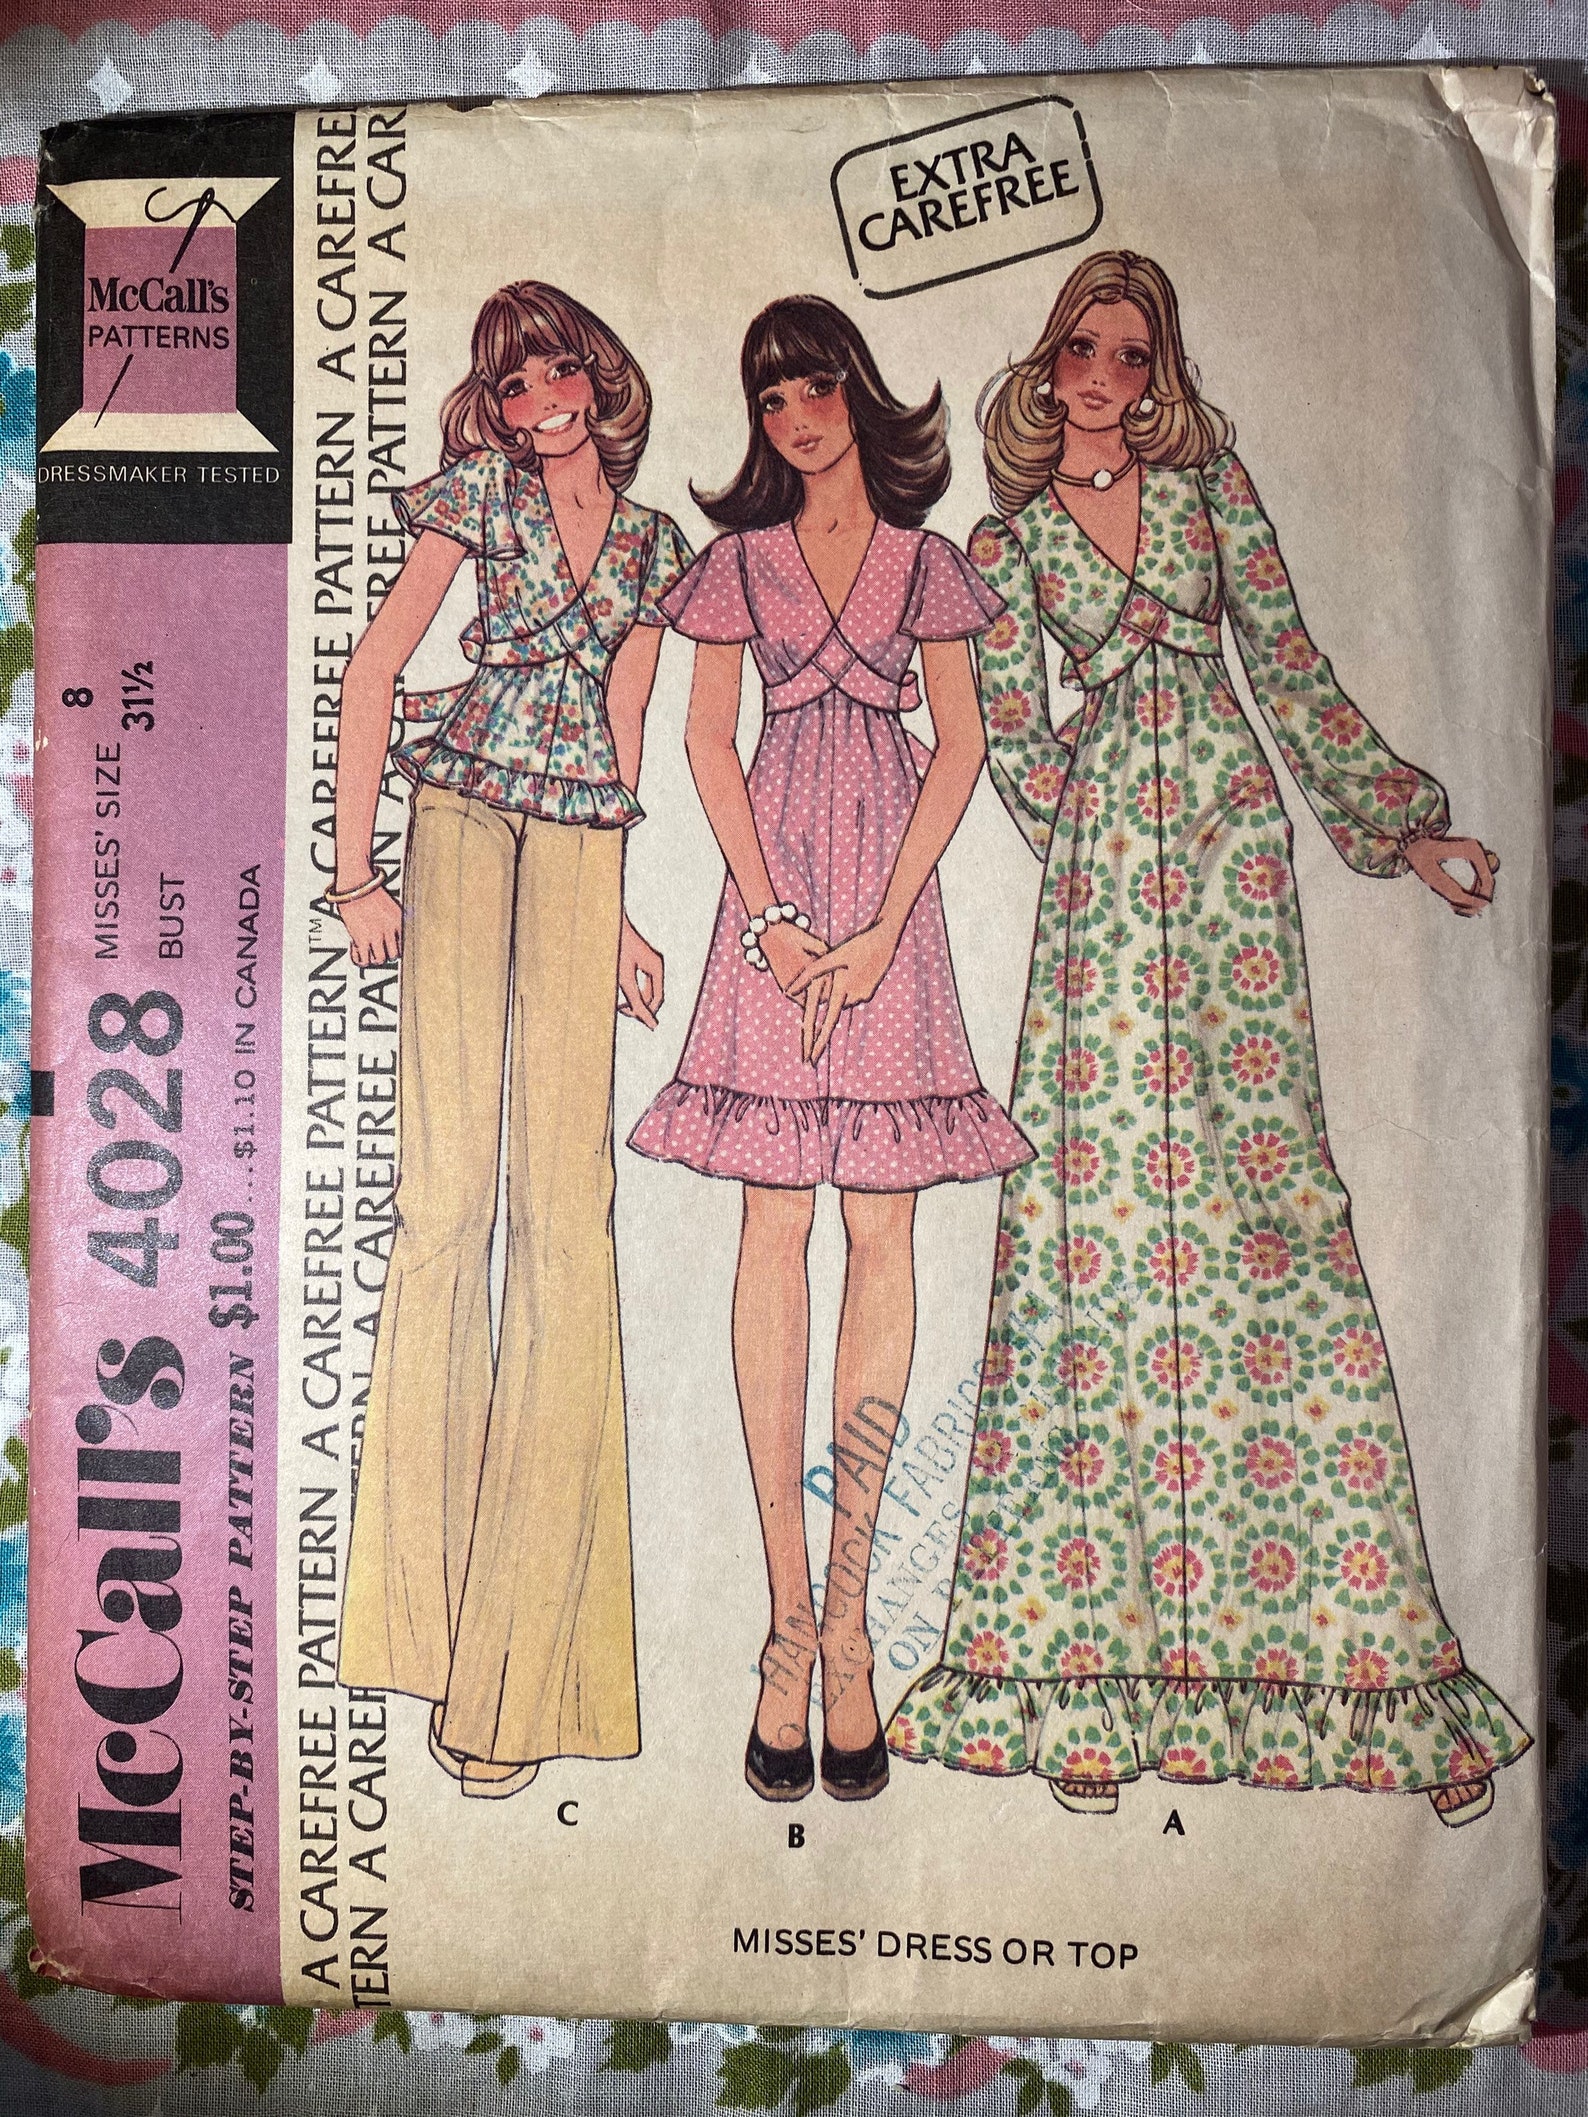 McCall's 4028 VINTAGE Sewing Pattern 1970s Boho/Hippie | Etsy